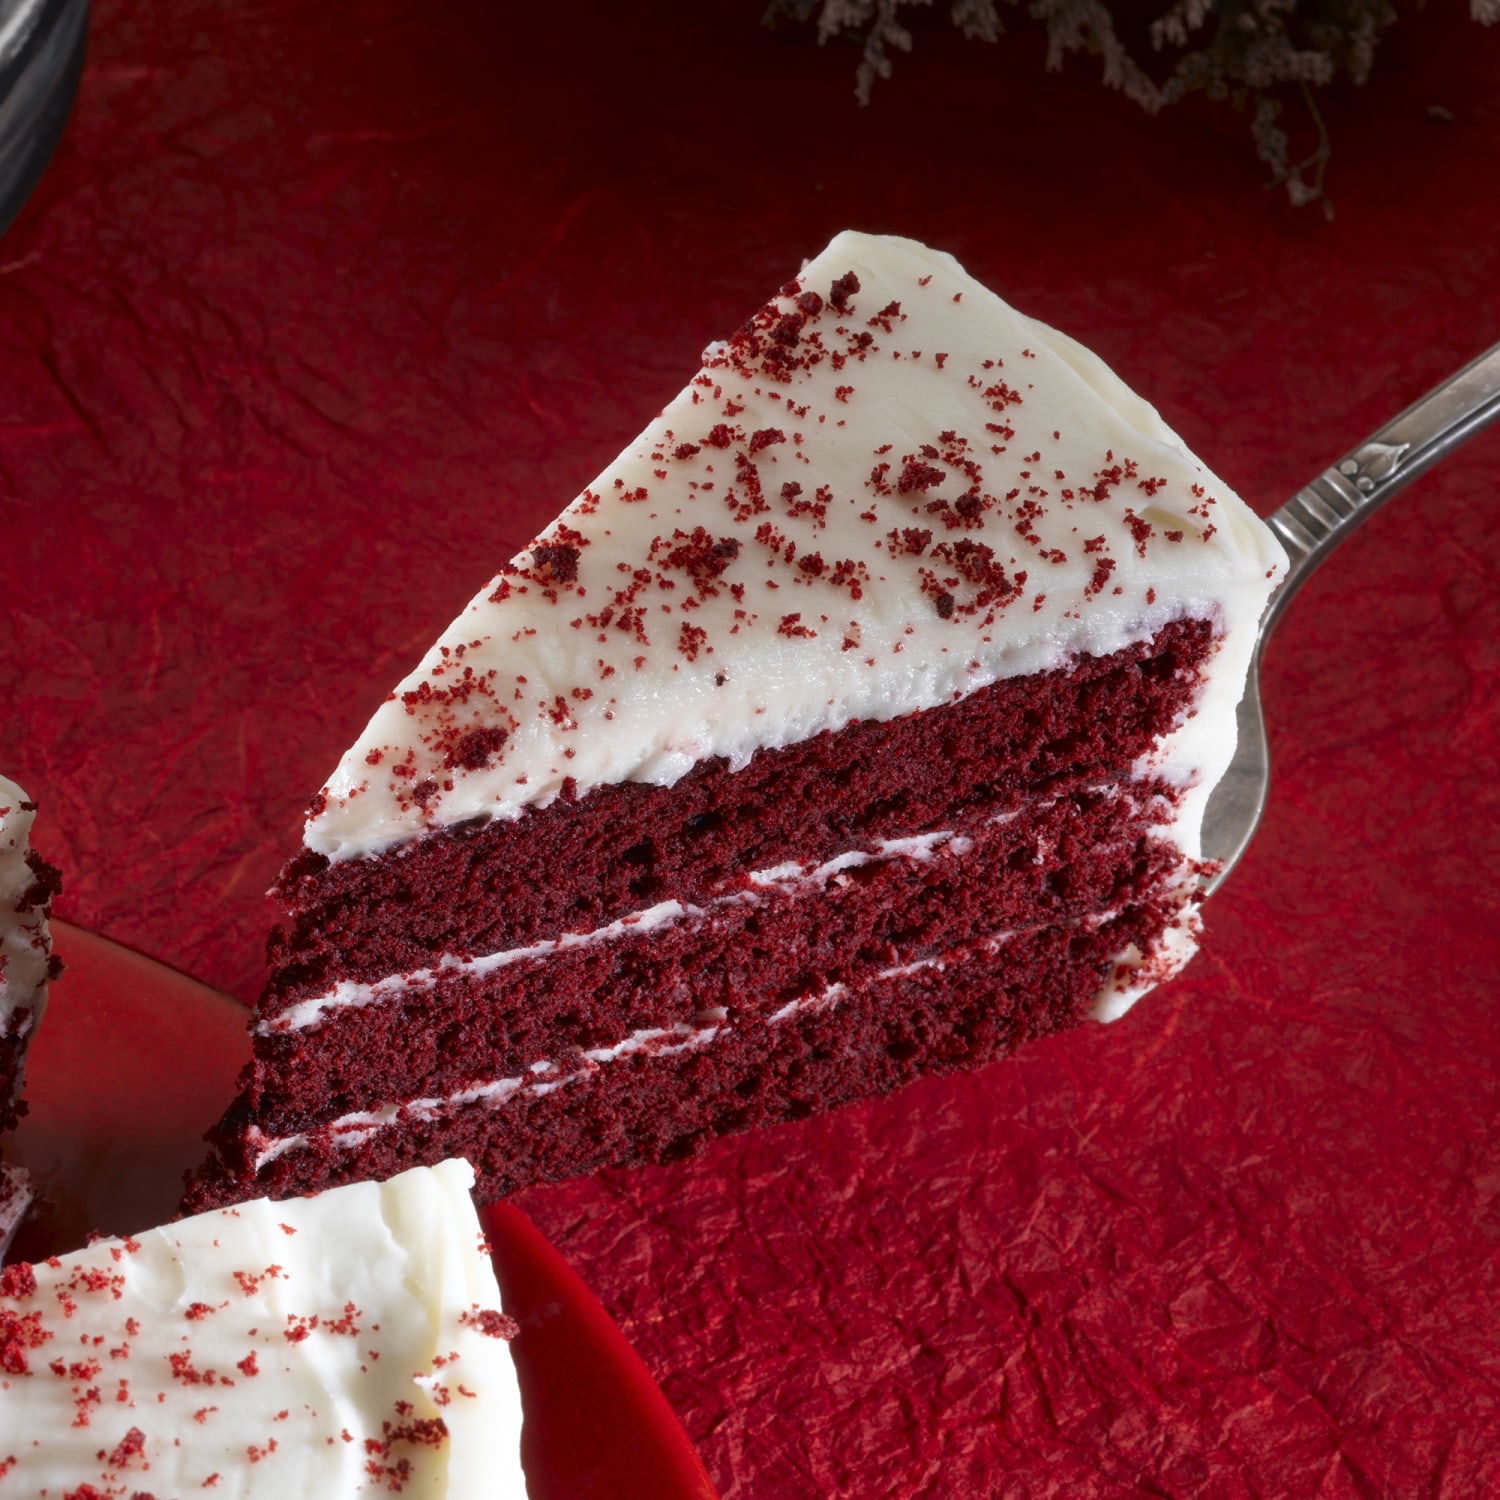 Red Velvet Cake with White Chocolate-Cream Cheese Frosting